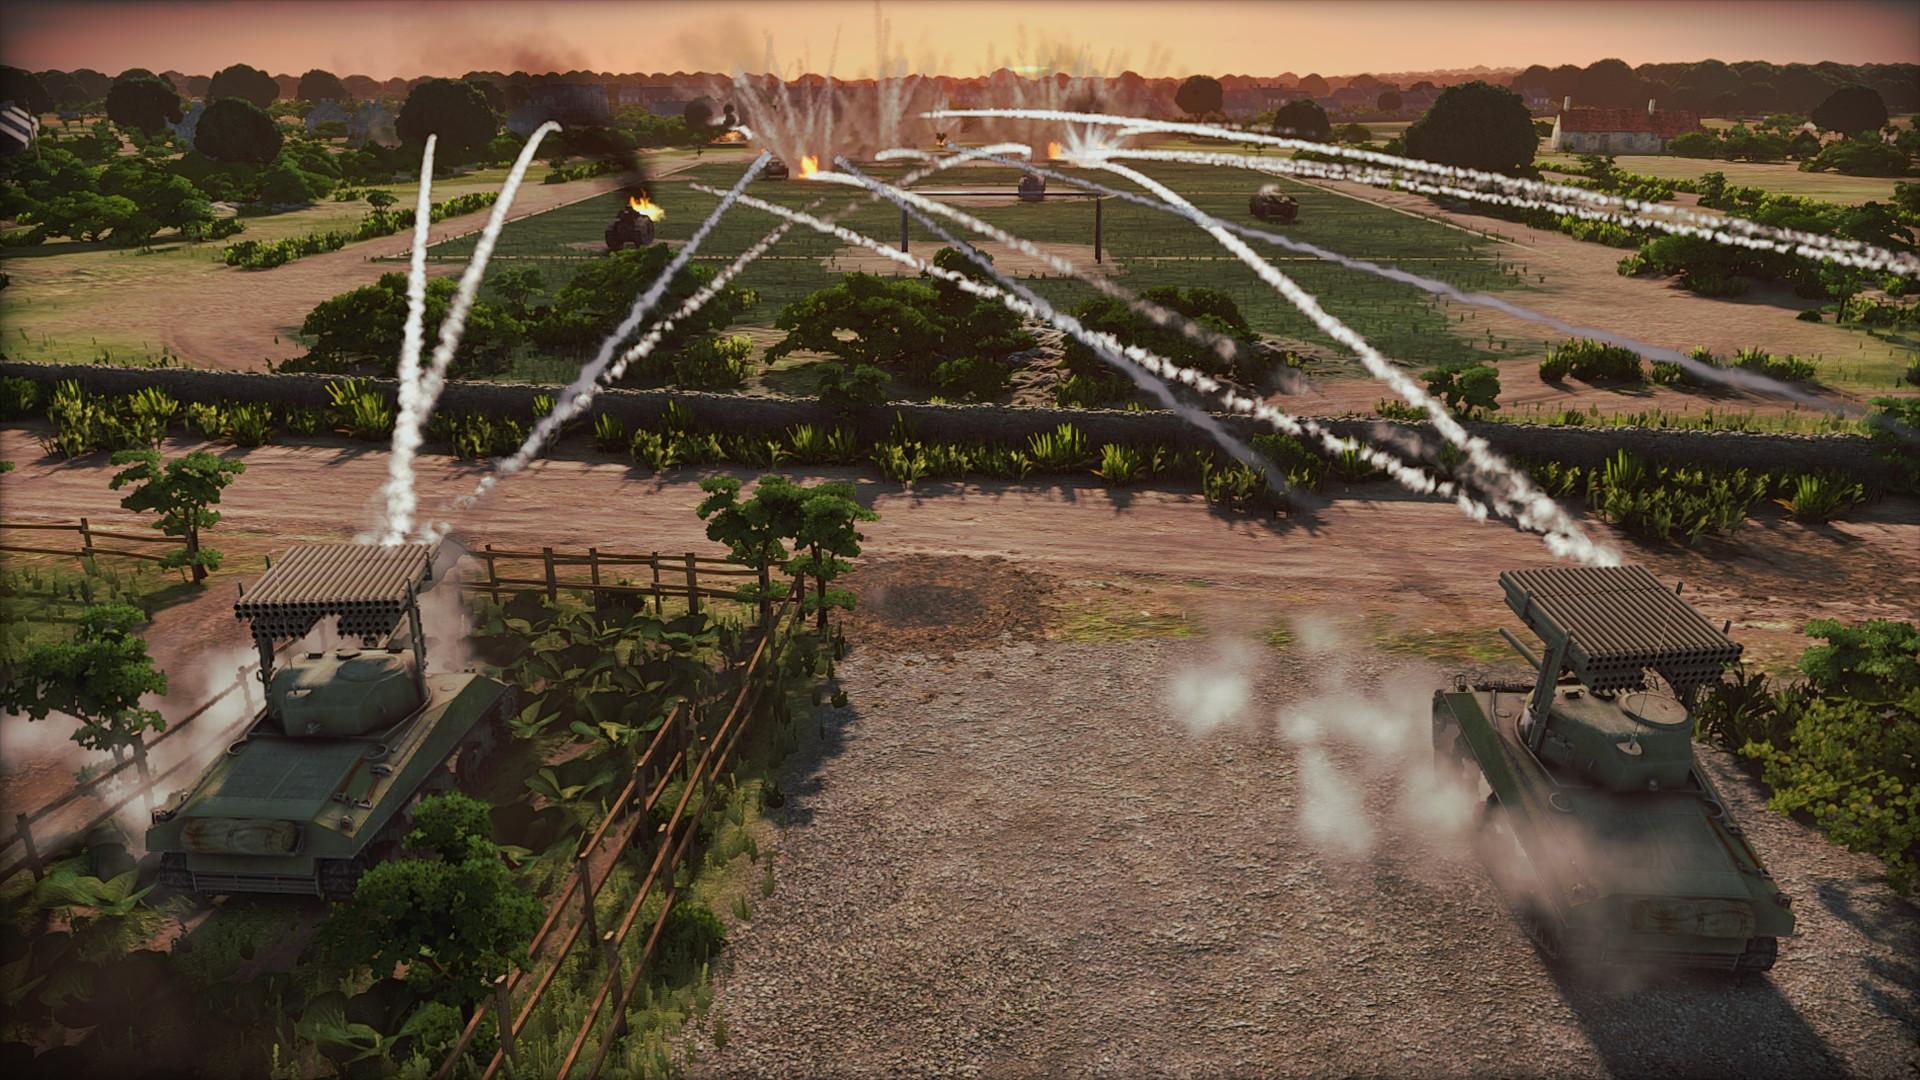 Screenshot №1 from game Steel Division: Normandy 44